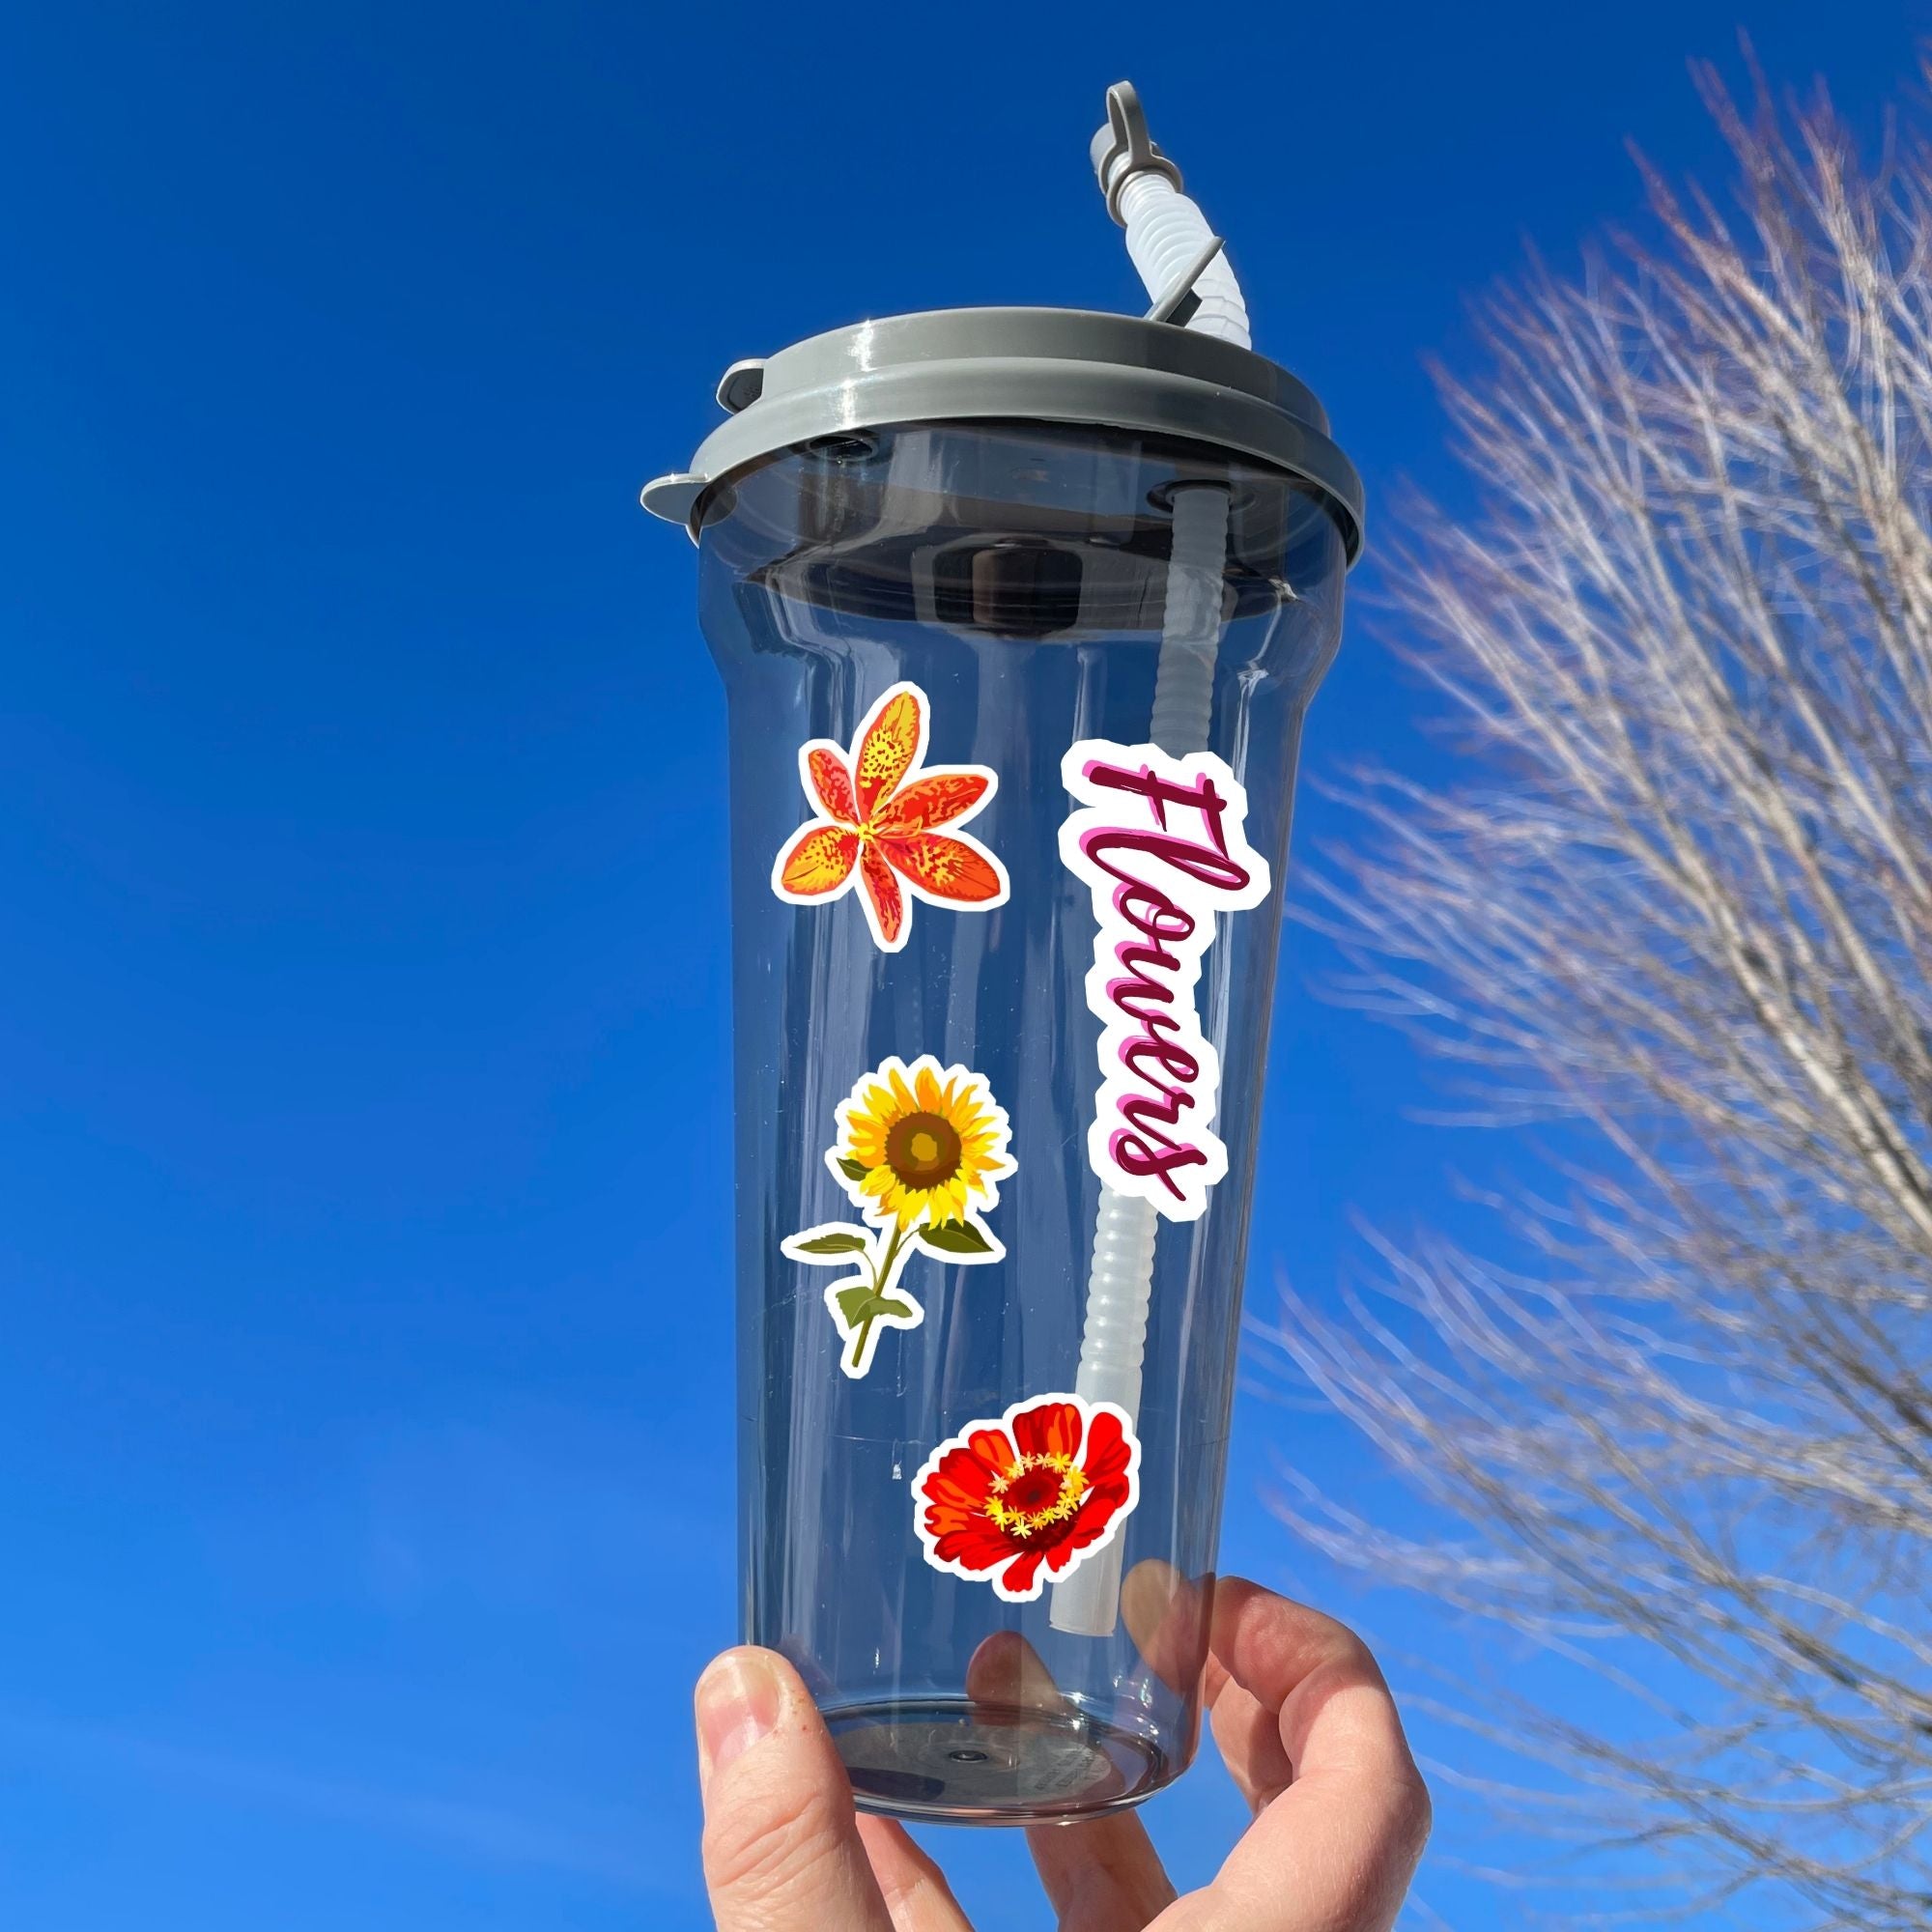 So many flowers! This sticker sheet is filled with images of all your favorite flowers. This image shows a water bottle with the sticker sheet header reading "Flowers", and three flower stickers applied to it.